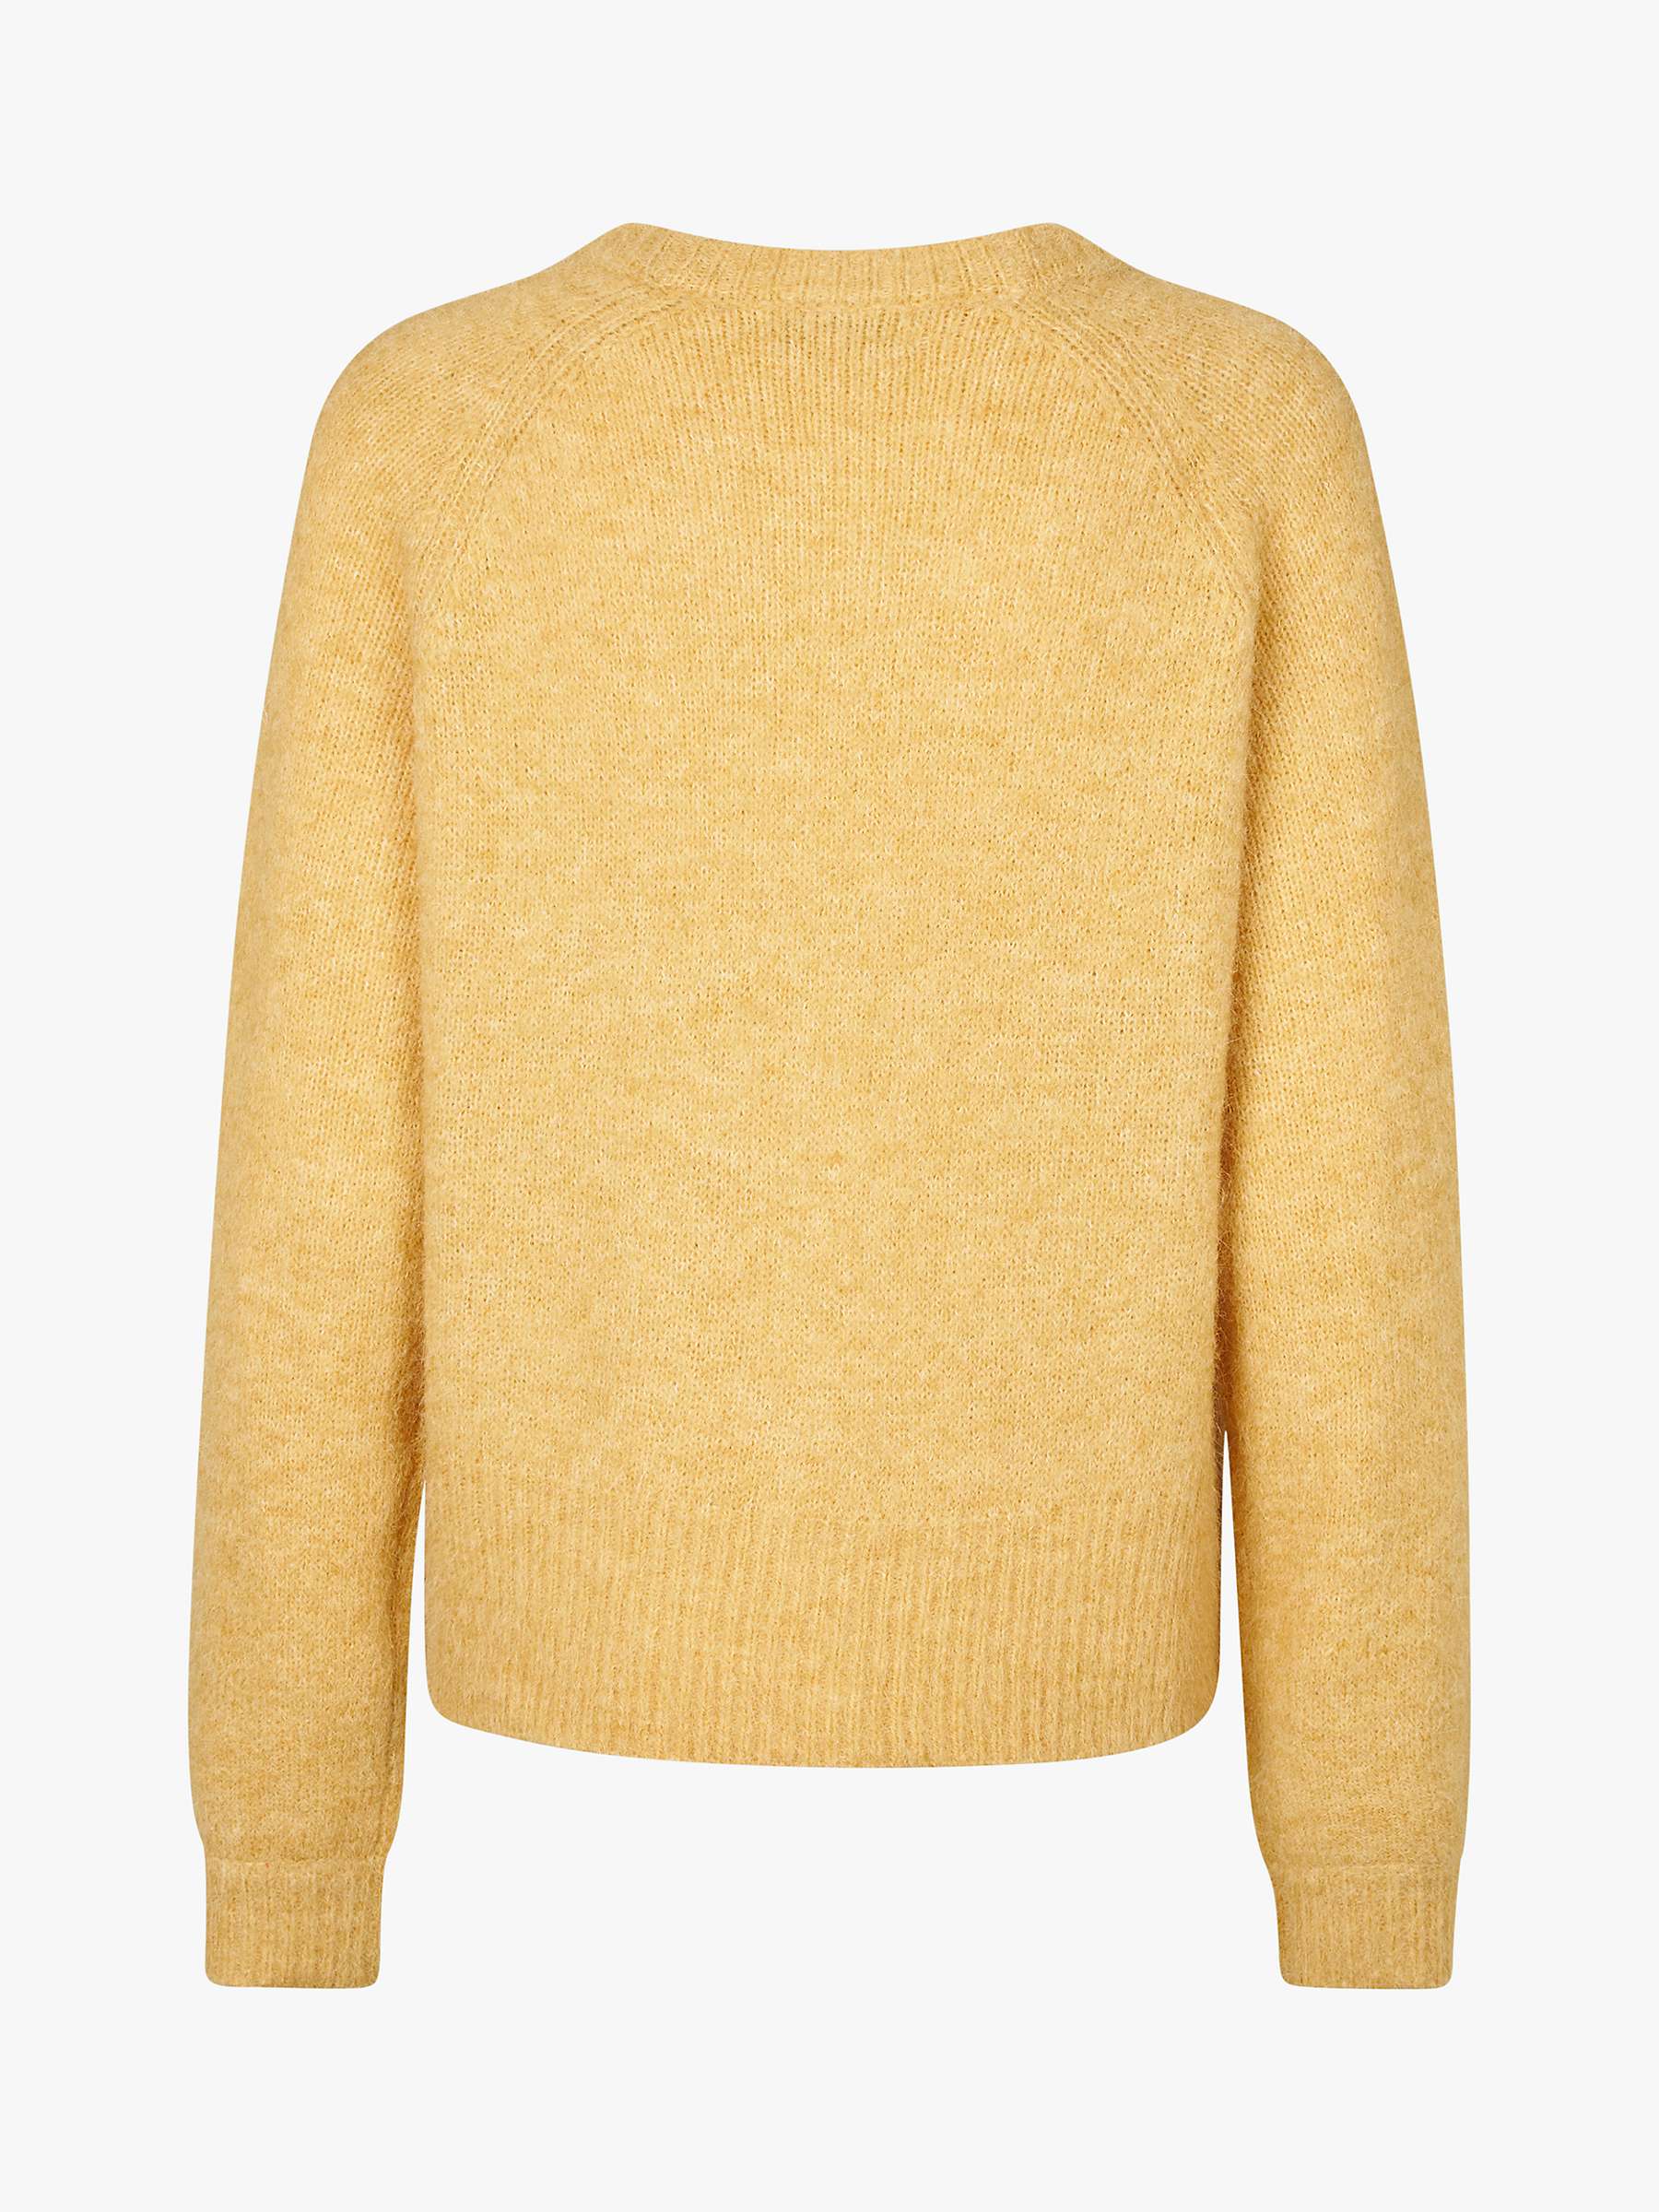 Buy Lollys Laundry Lucille Long Sleeve Cardigan, Yellow Online at johnlewis.com